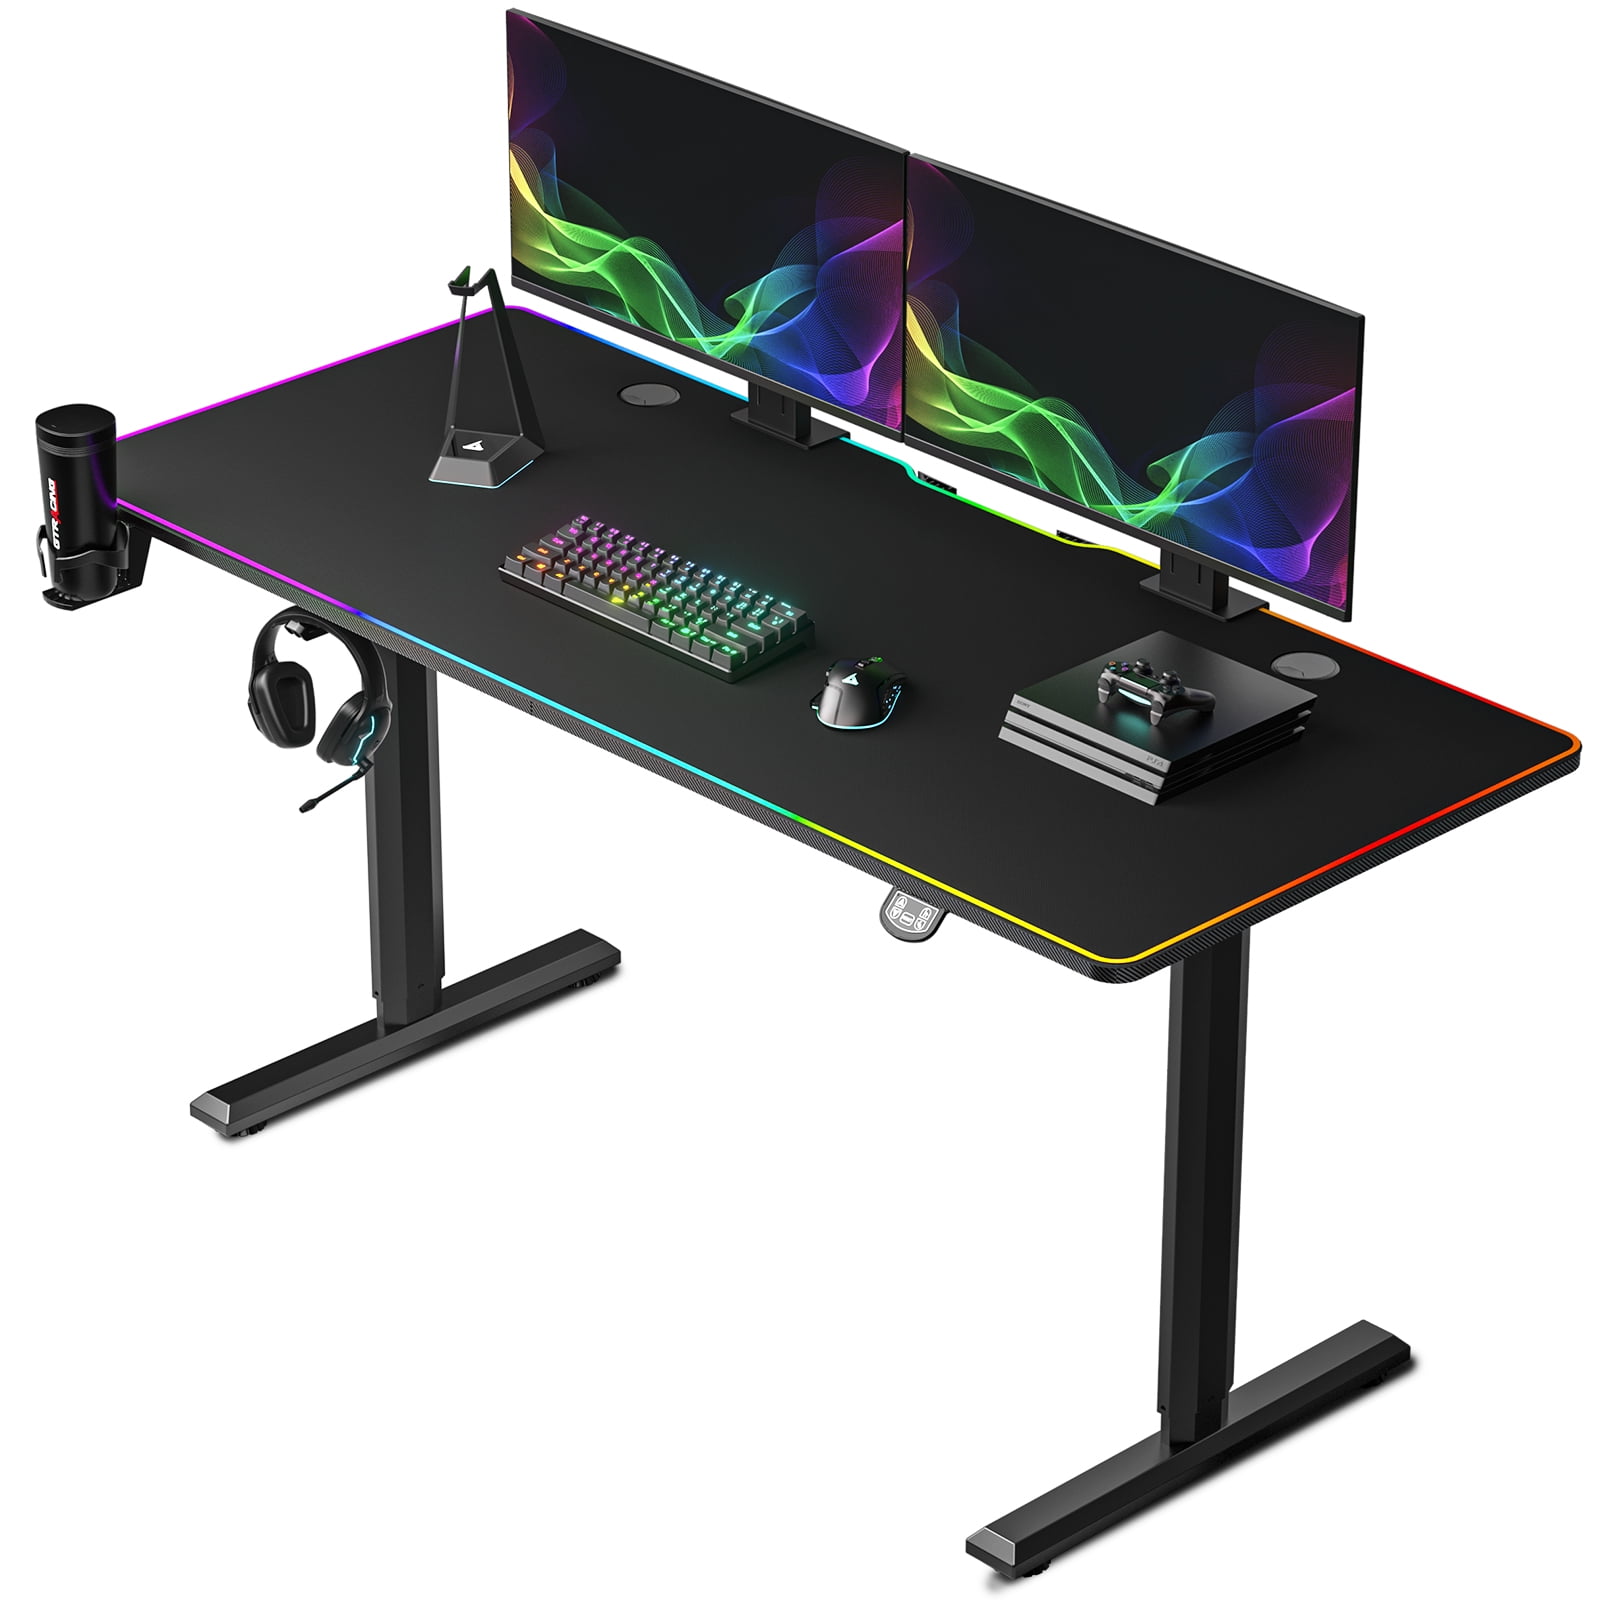  GTRACING 55 Inch Gaming Desk with LED Lights, Computer Gamer  Desk with Monitor Stand, Ergonomic Carbon Fiber Surface Gaming Table with  Power Outlet and Mouse Pad for Home Office, RGB 